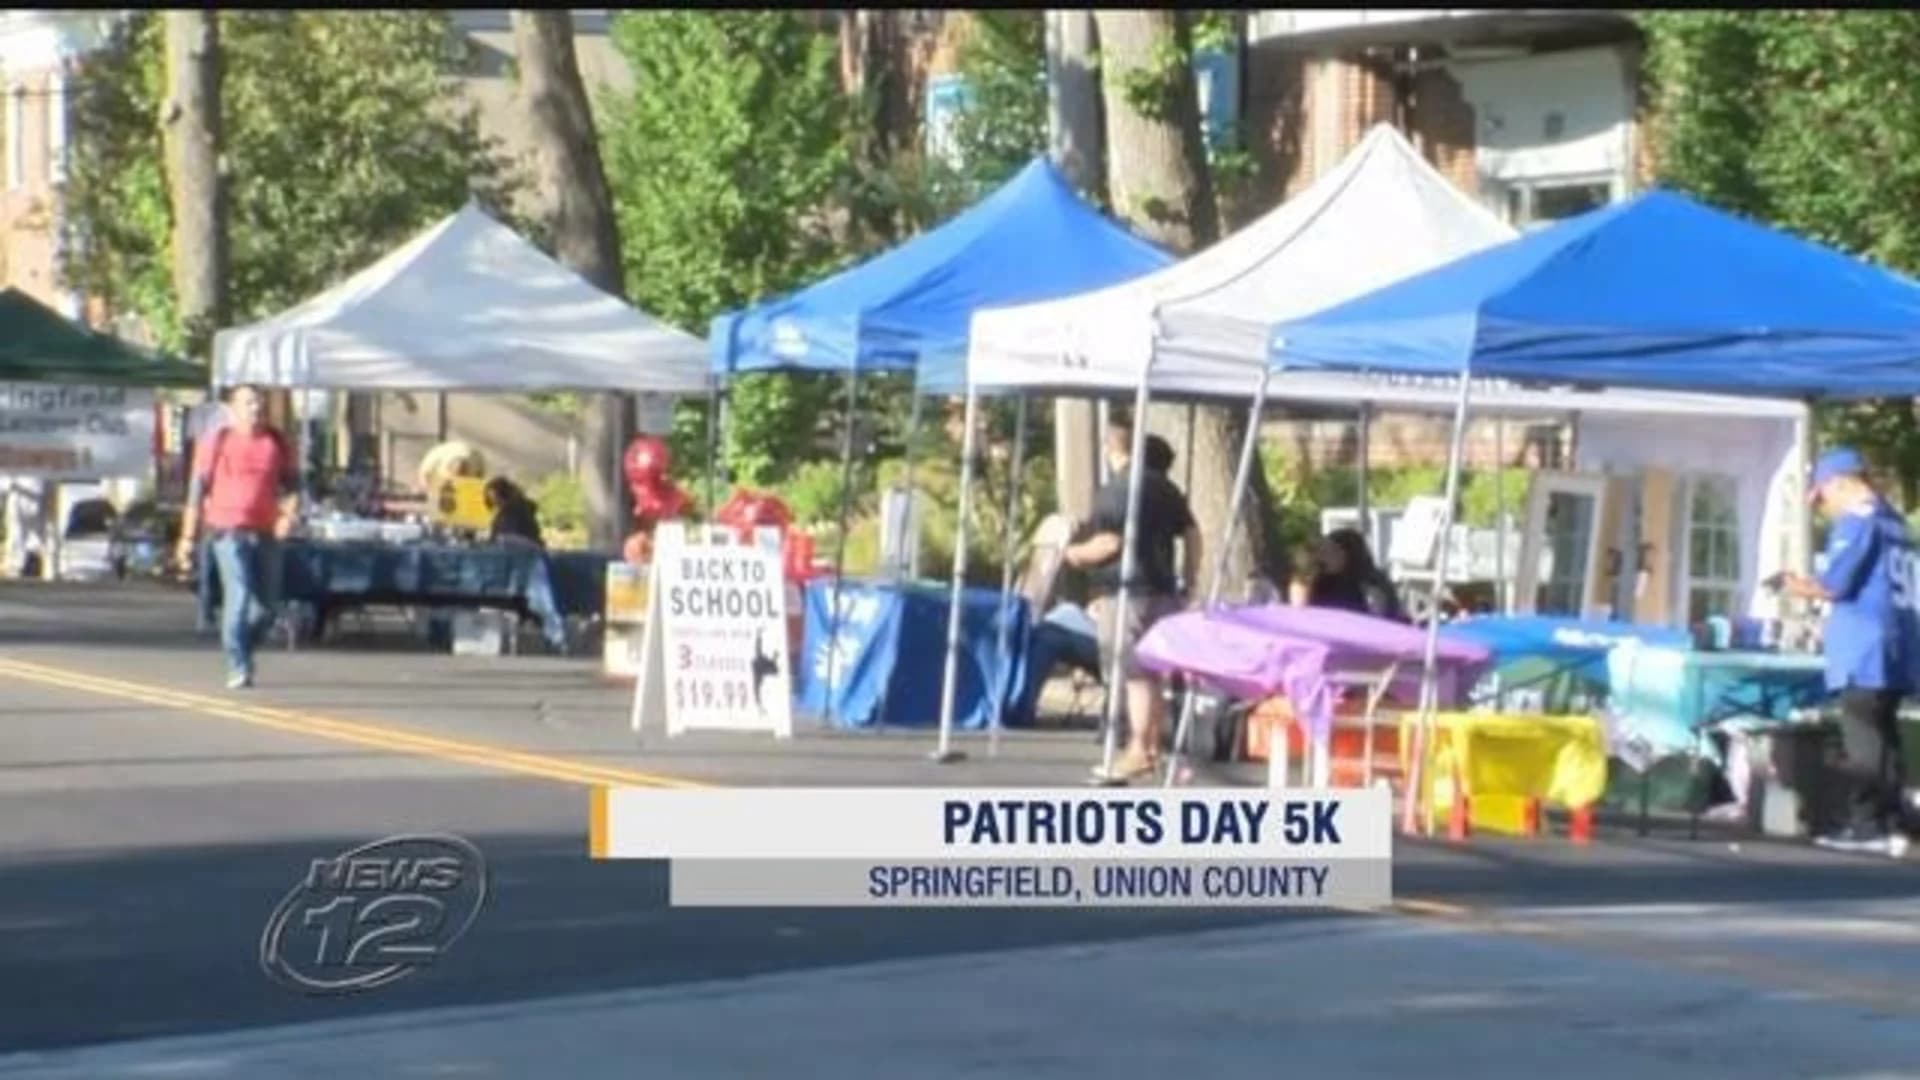 Veterans honored with tribute 5K and street fair in Springfield